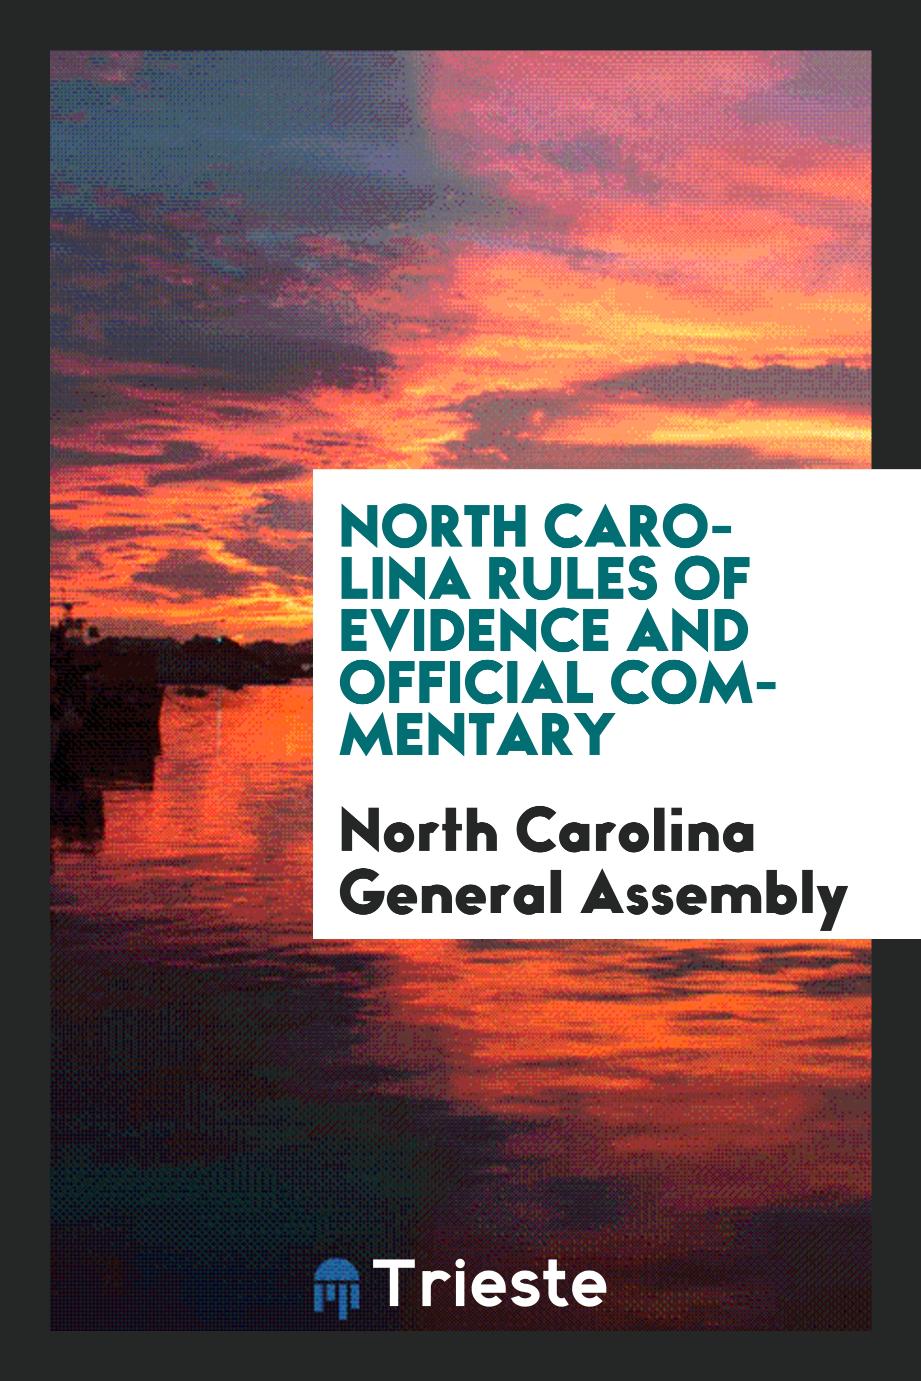 North Carolina rules of evidence and official commentary